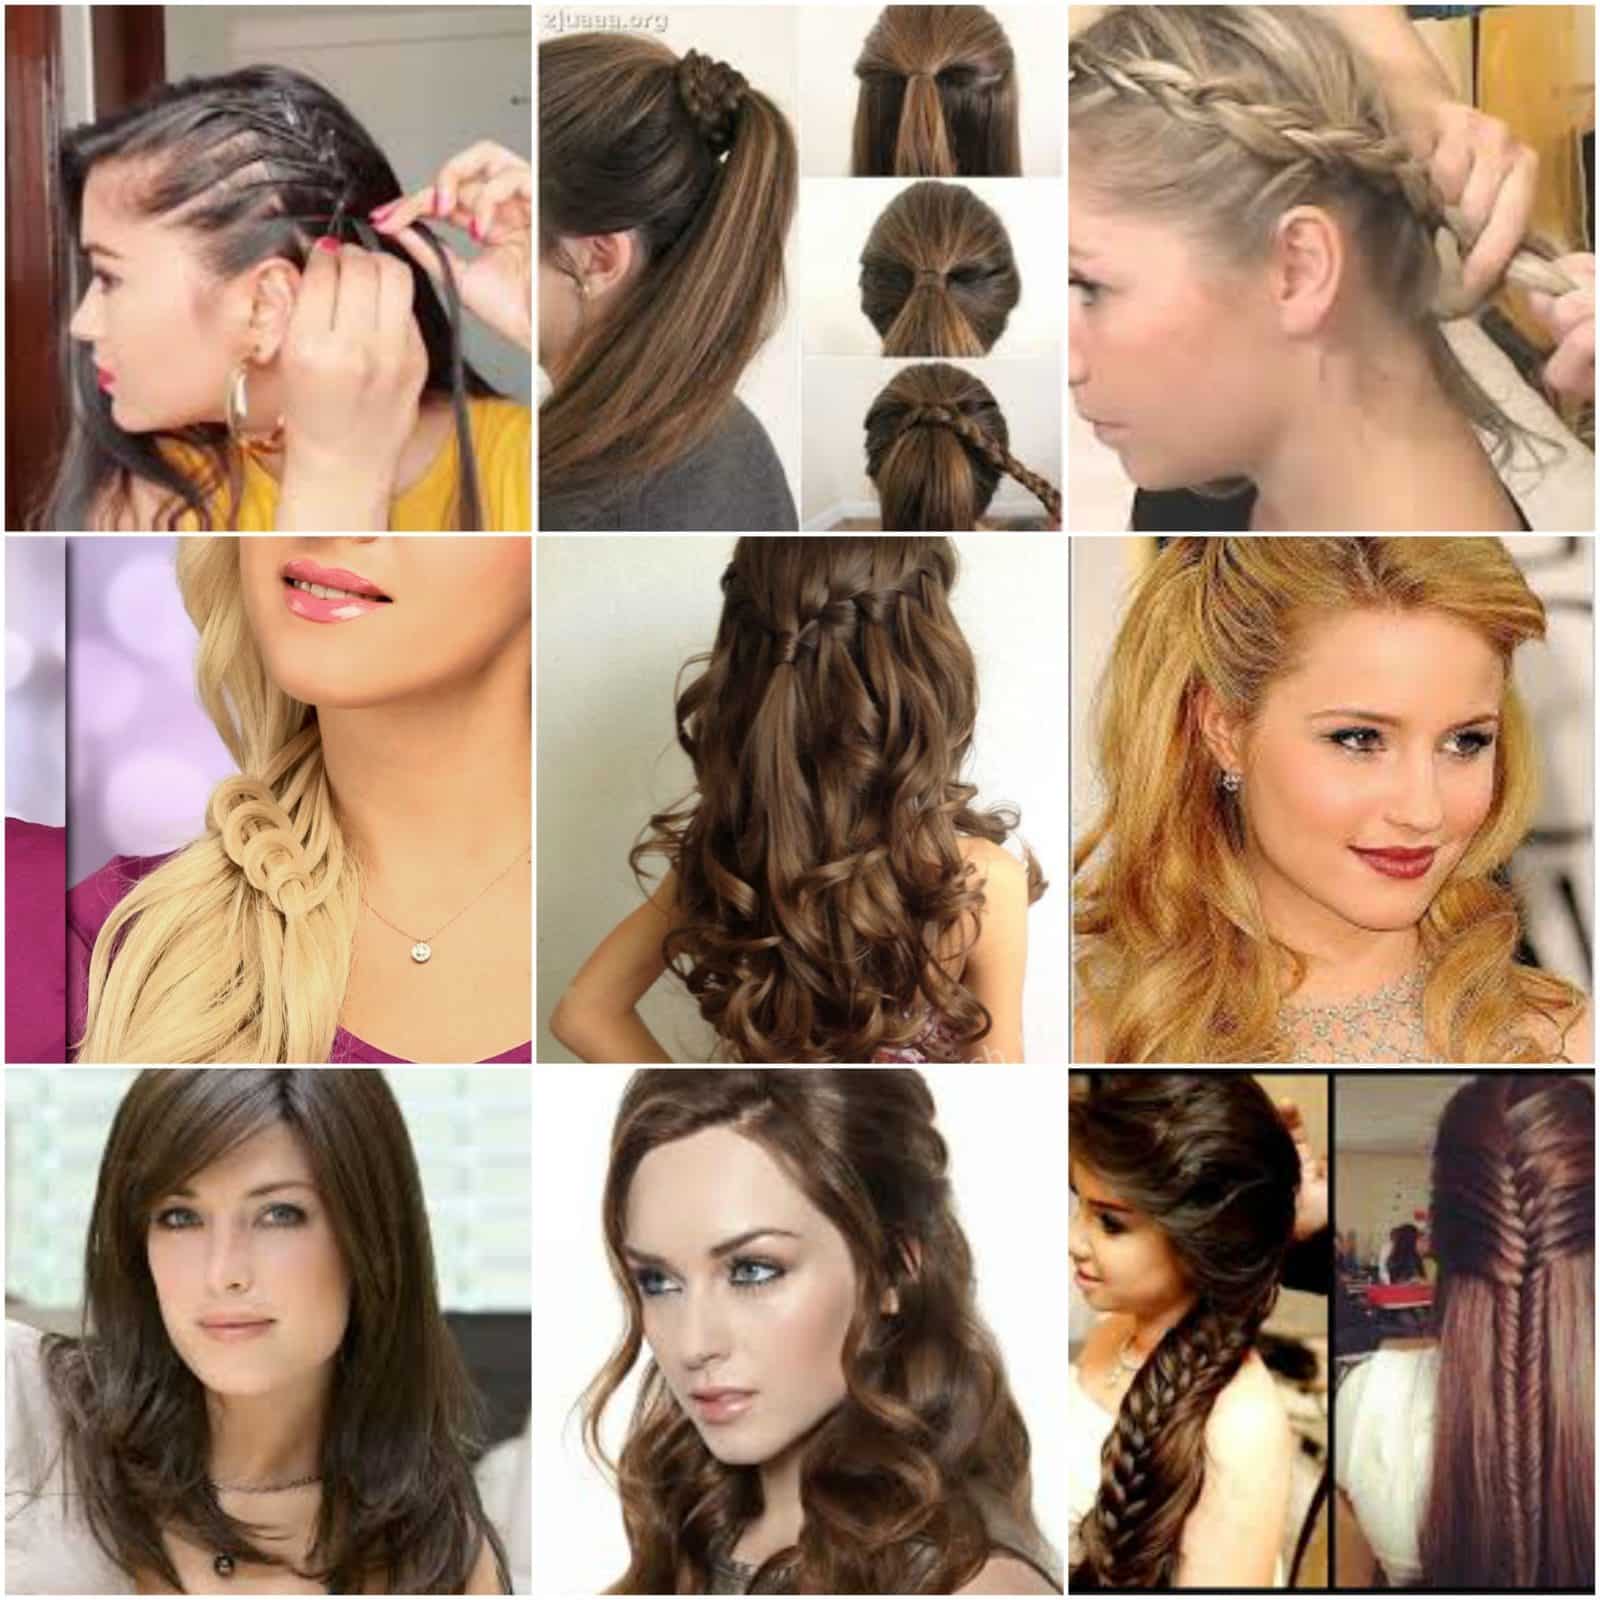 Best hairstyle based on your face shape | ShowStopper Salon